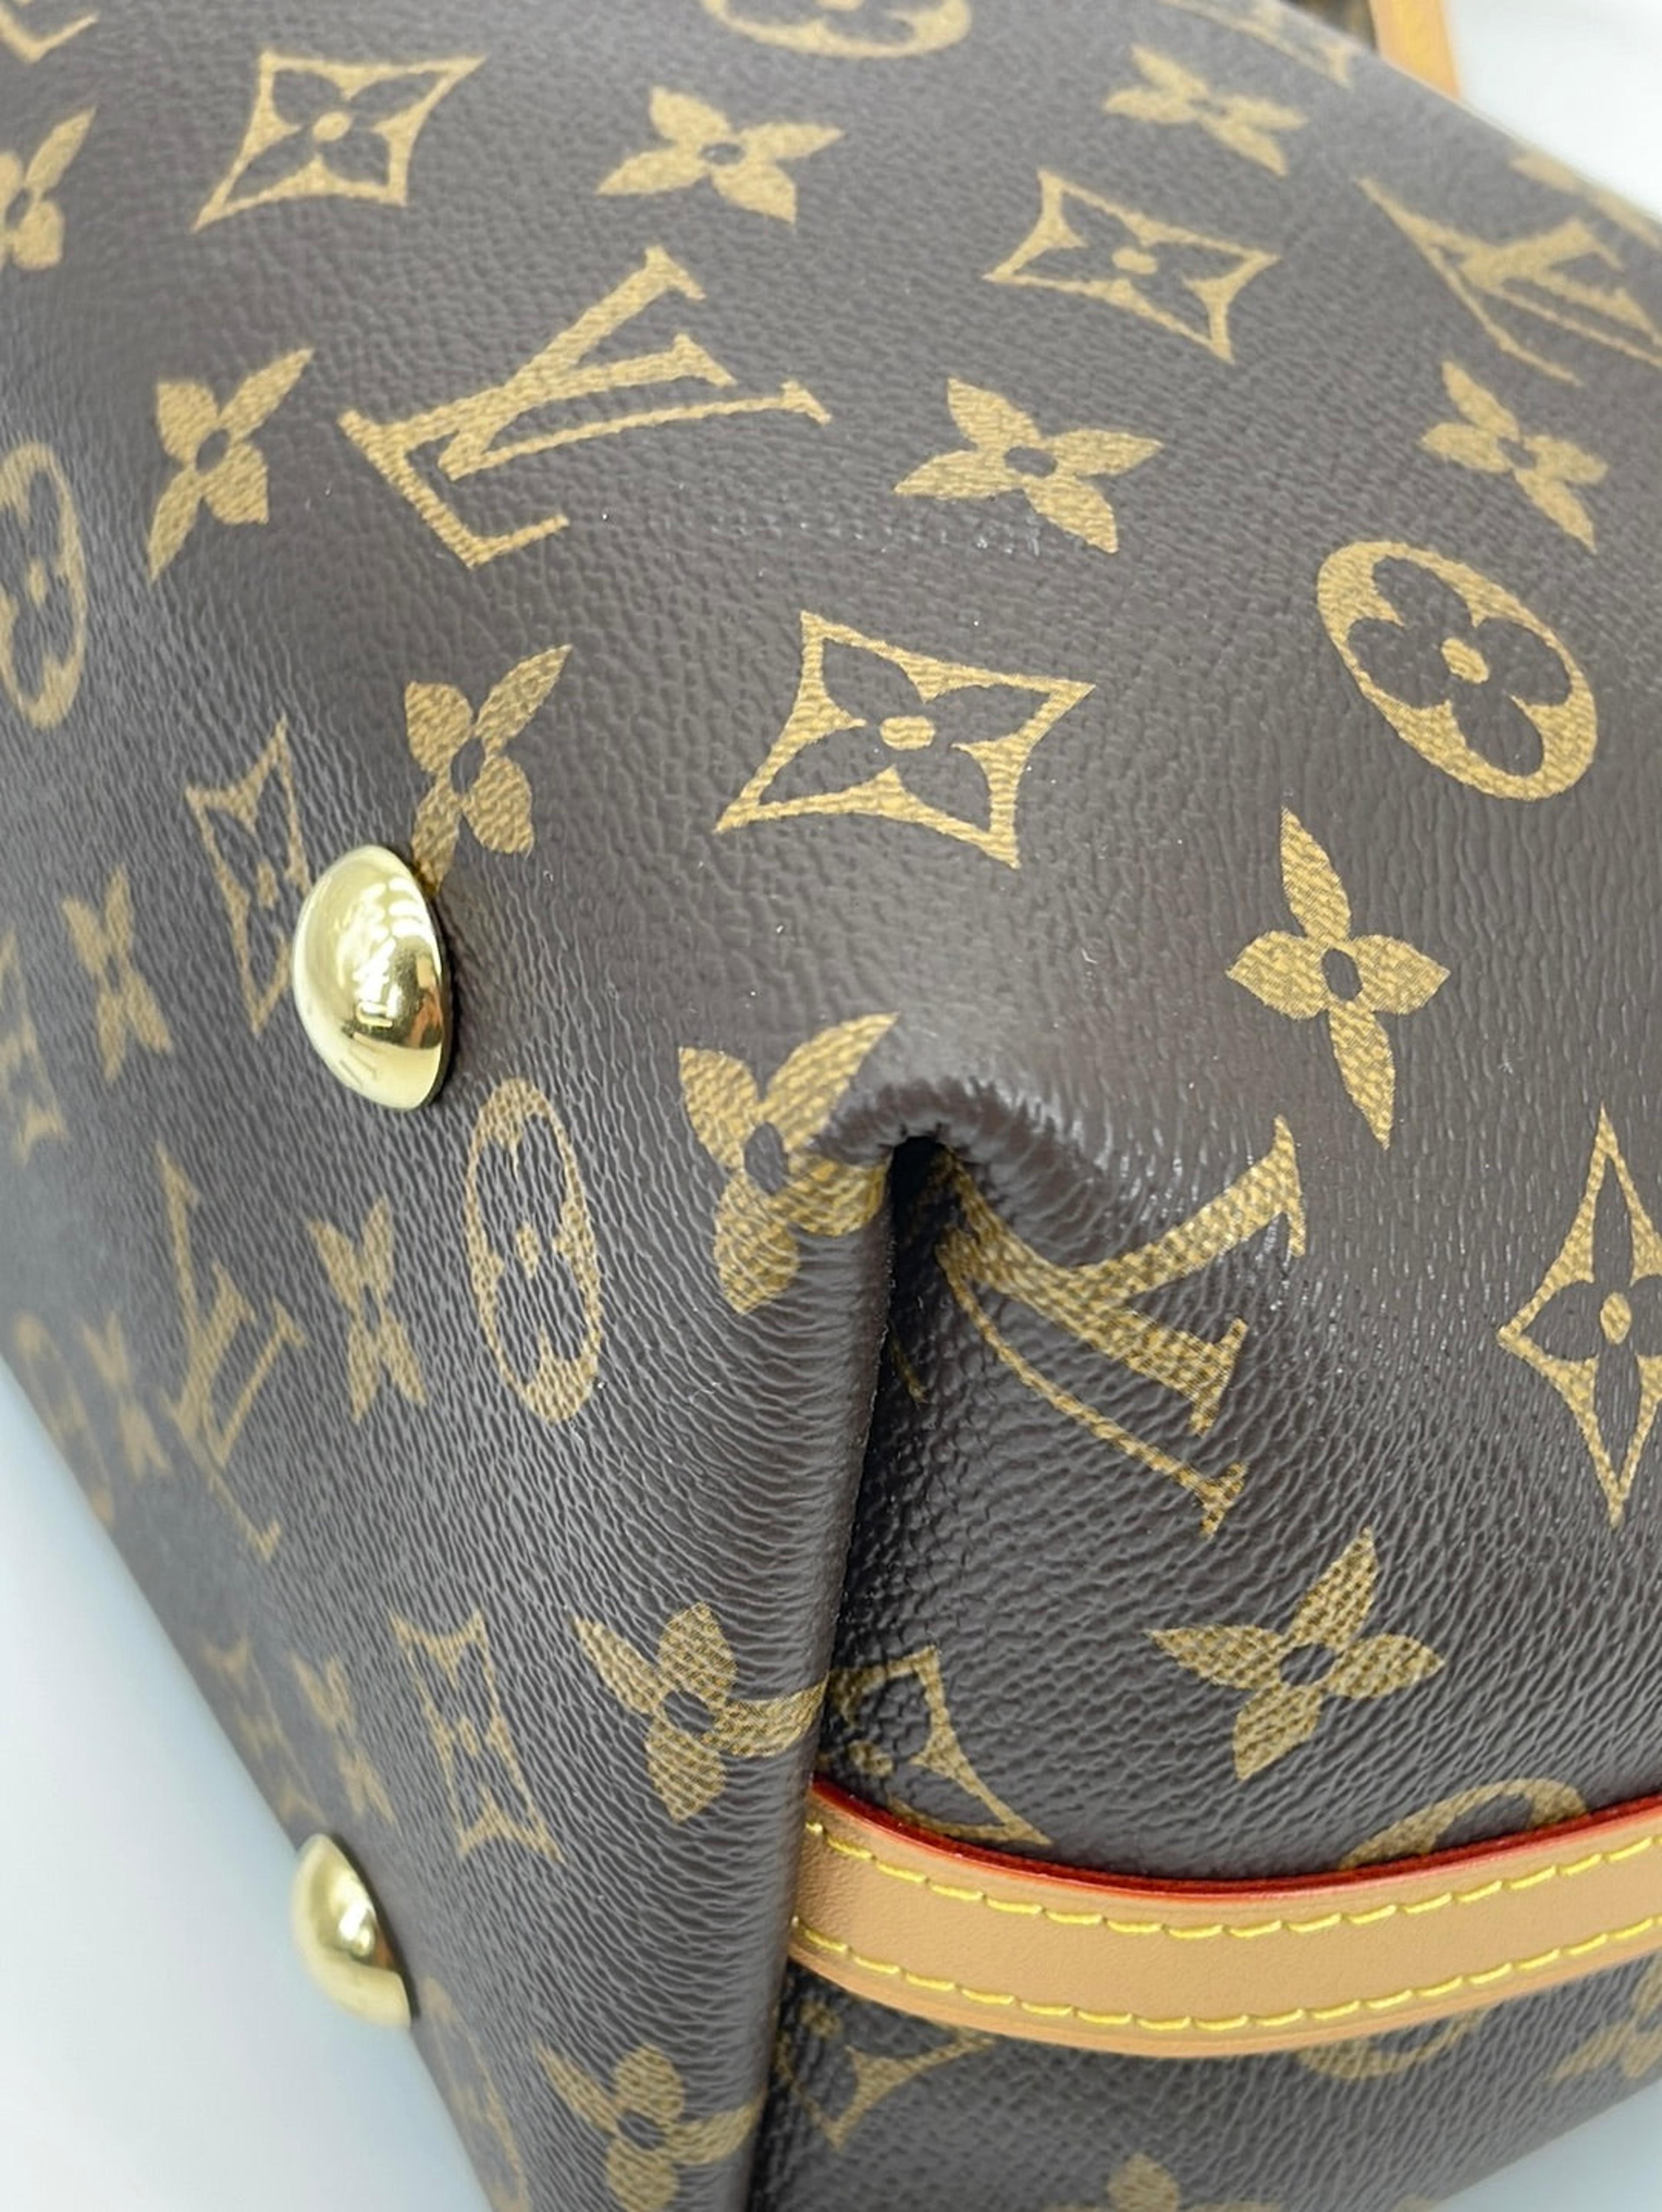 Sold at Auction: Louis Vuitton, Louis Vuitton - NEW - On the go MM - Black/Beige  Embossed Leather Tote w/ Strap